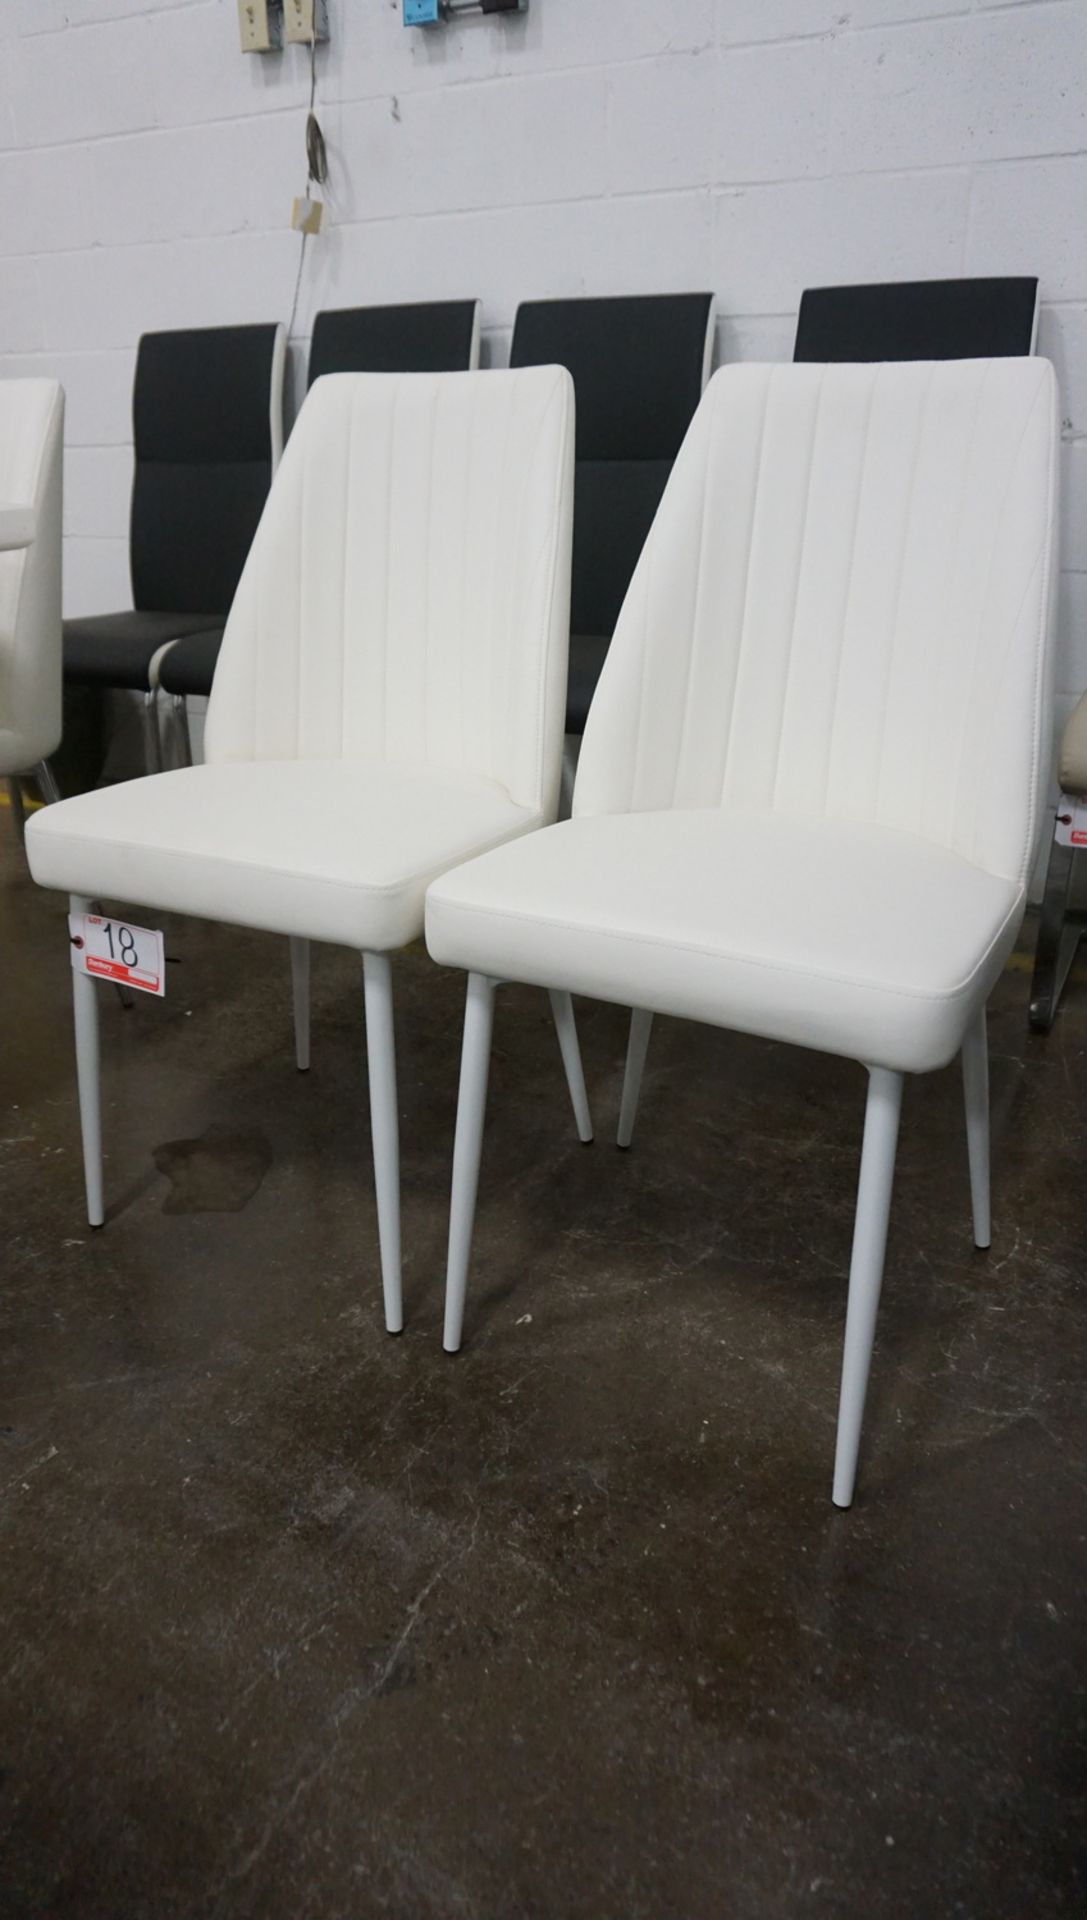 UNITS - WHITE PU LEATHER W/ CHROME LEGS DINING CHAIRS